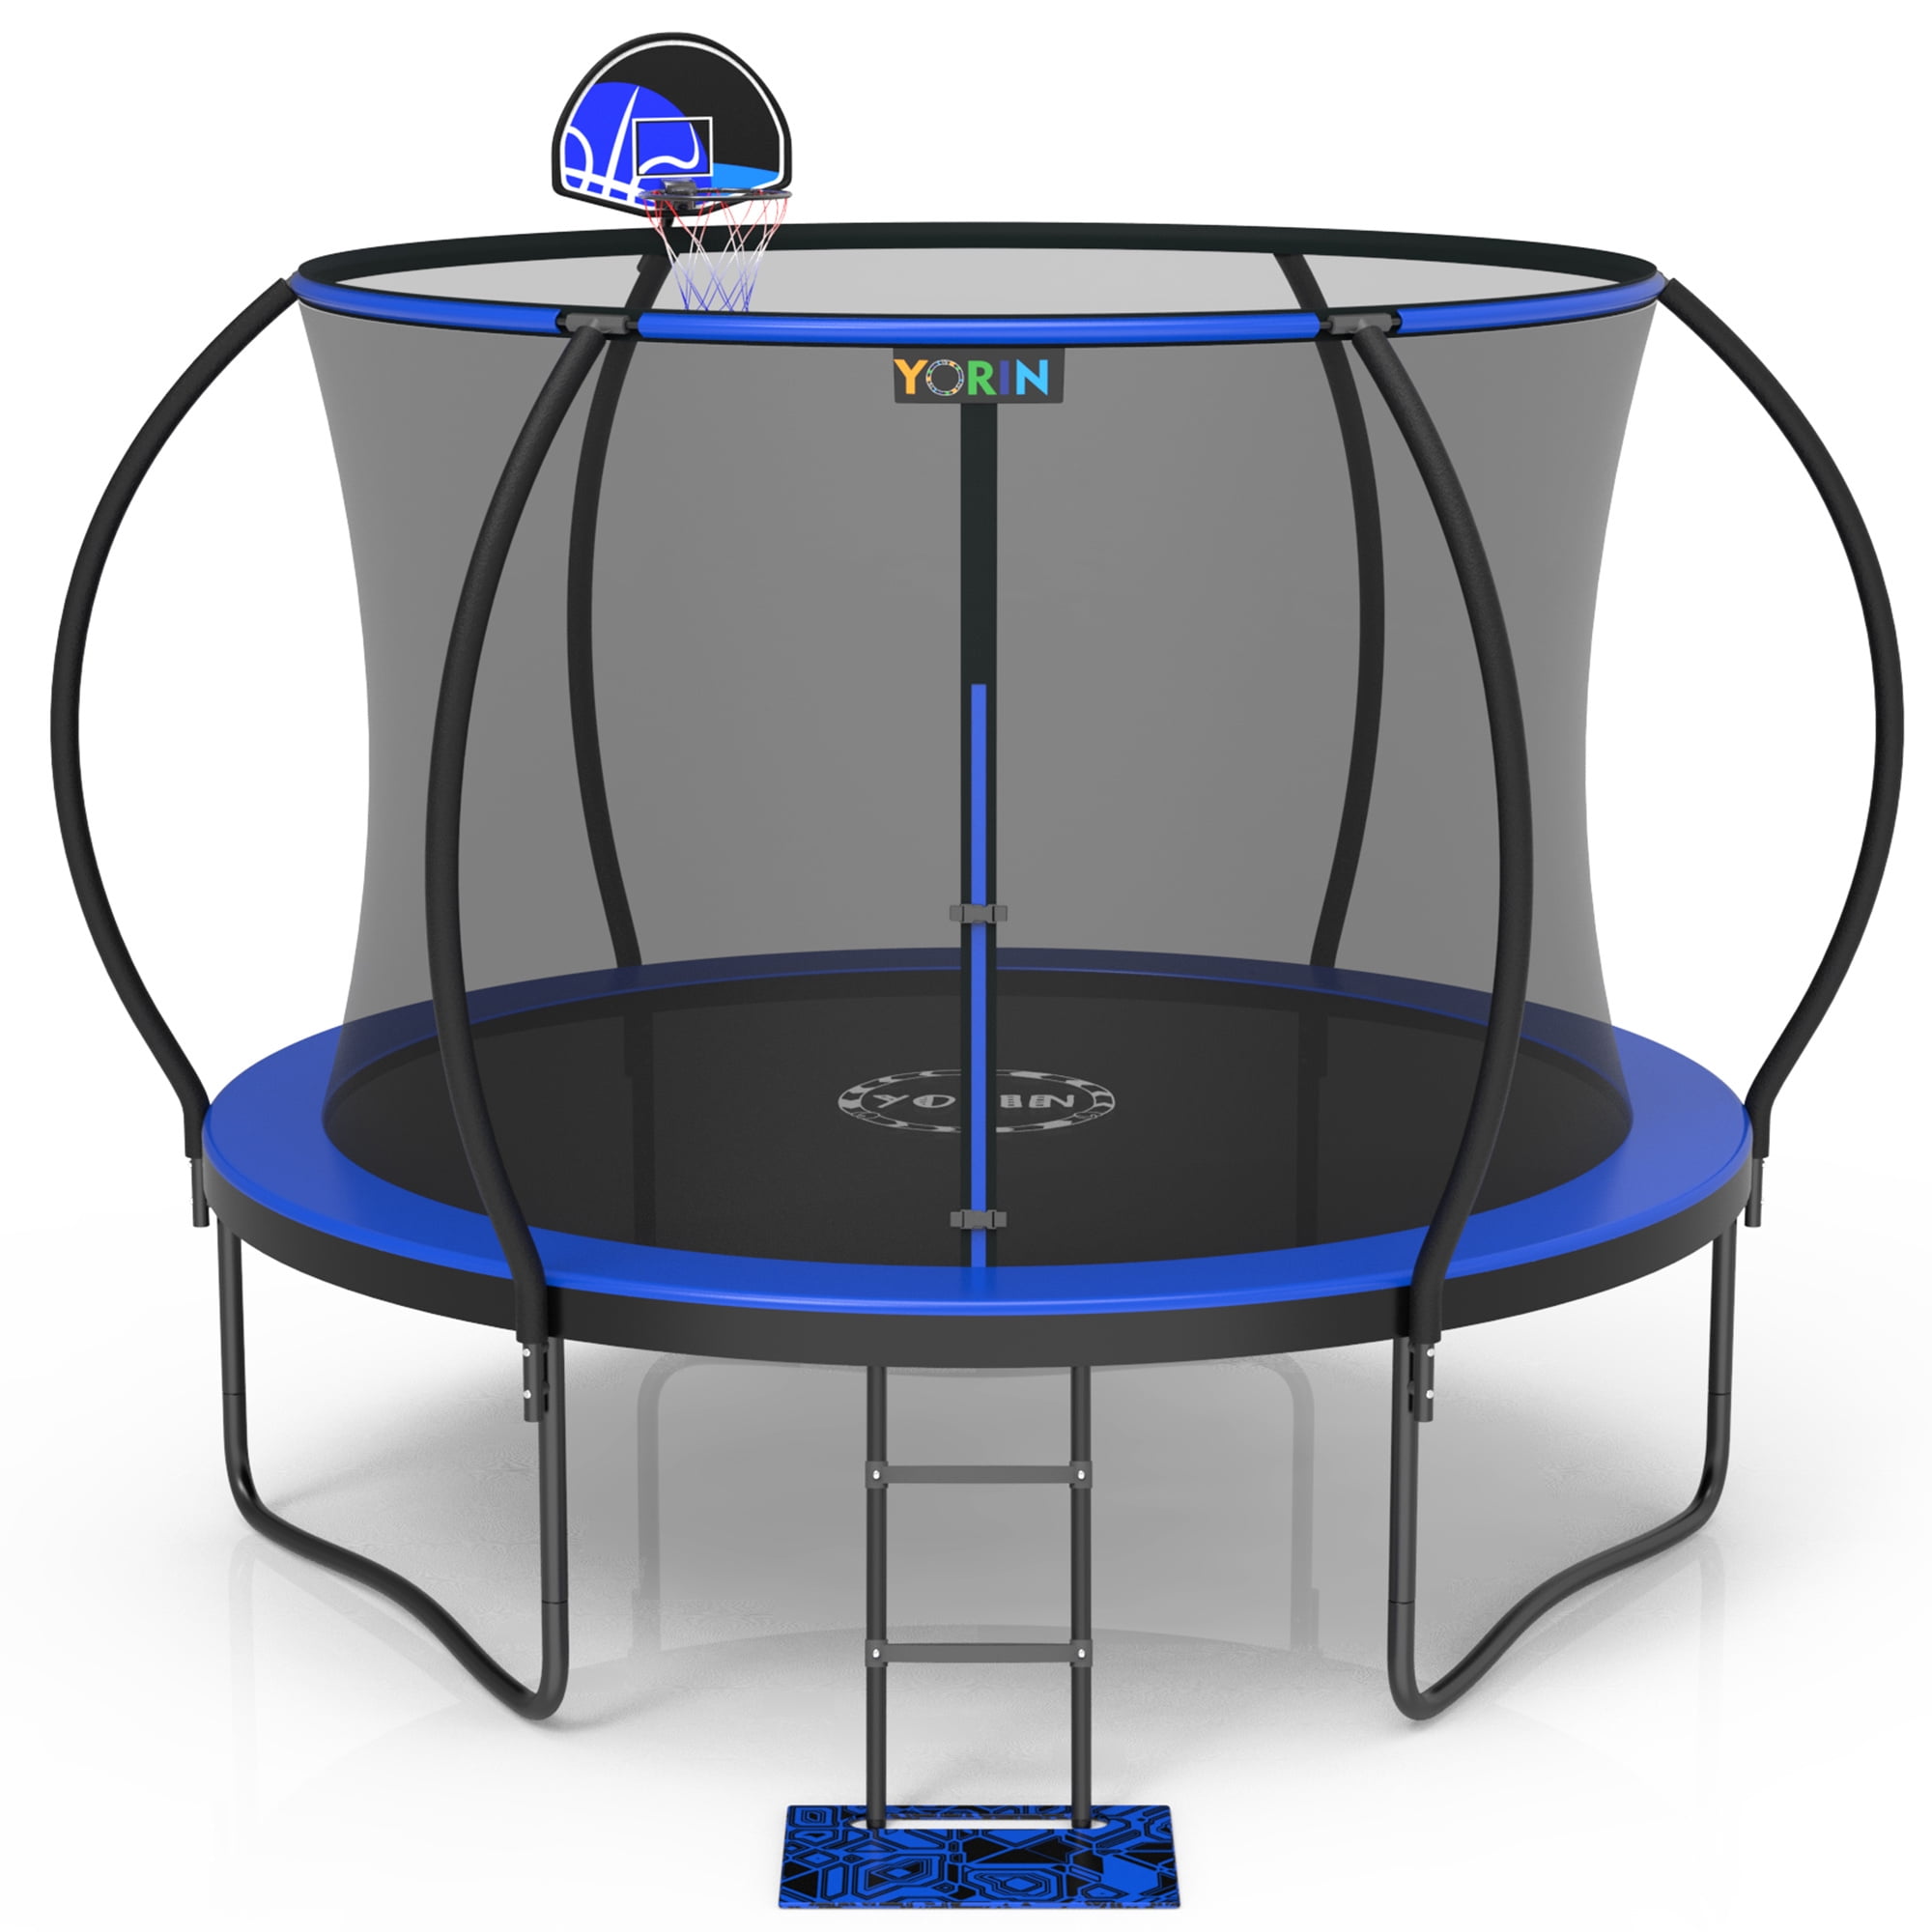 YORIN Trampoline for 2-3 Kids, 8FT 10FT Trampoline for Adults with ...